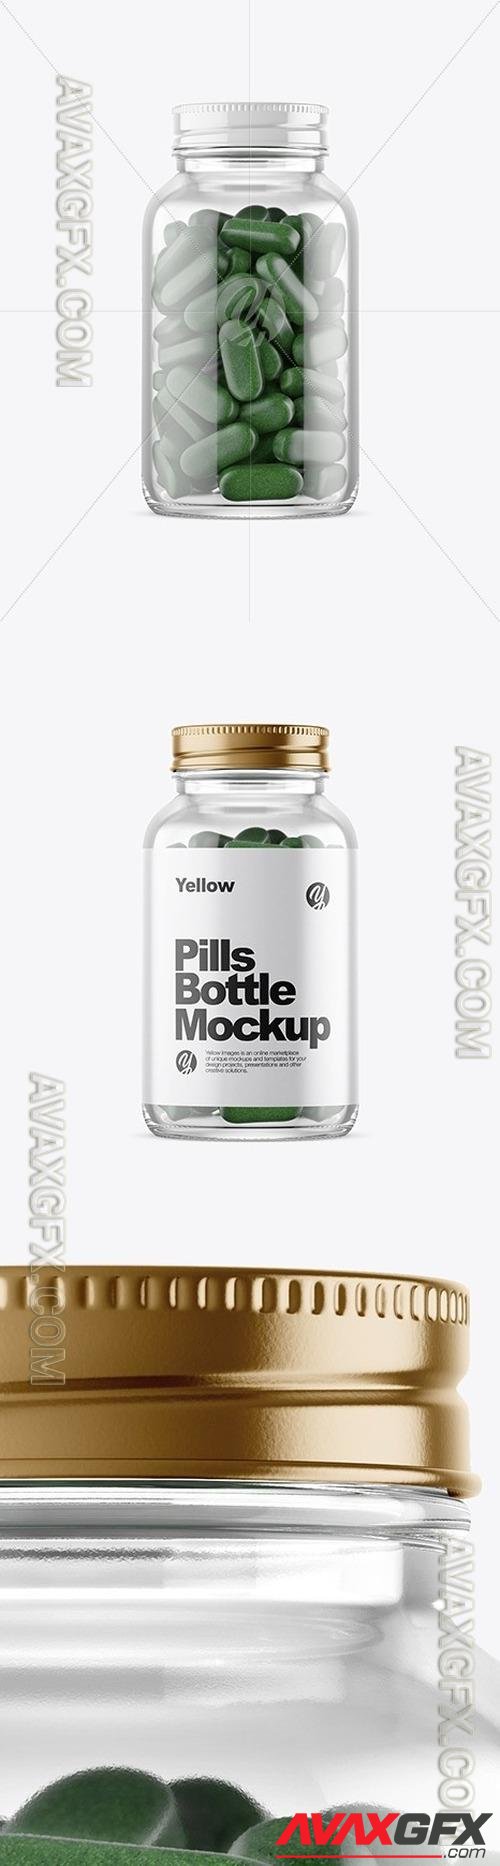 Clear Glass Bottle With Pills Mockup 51638 TIF